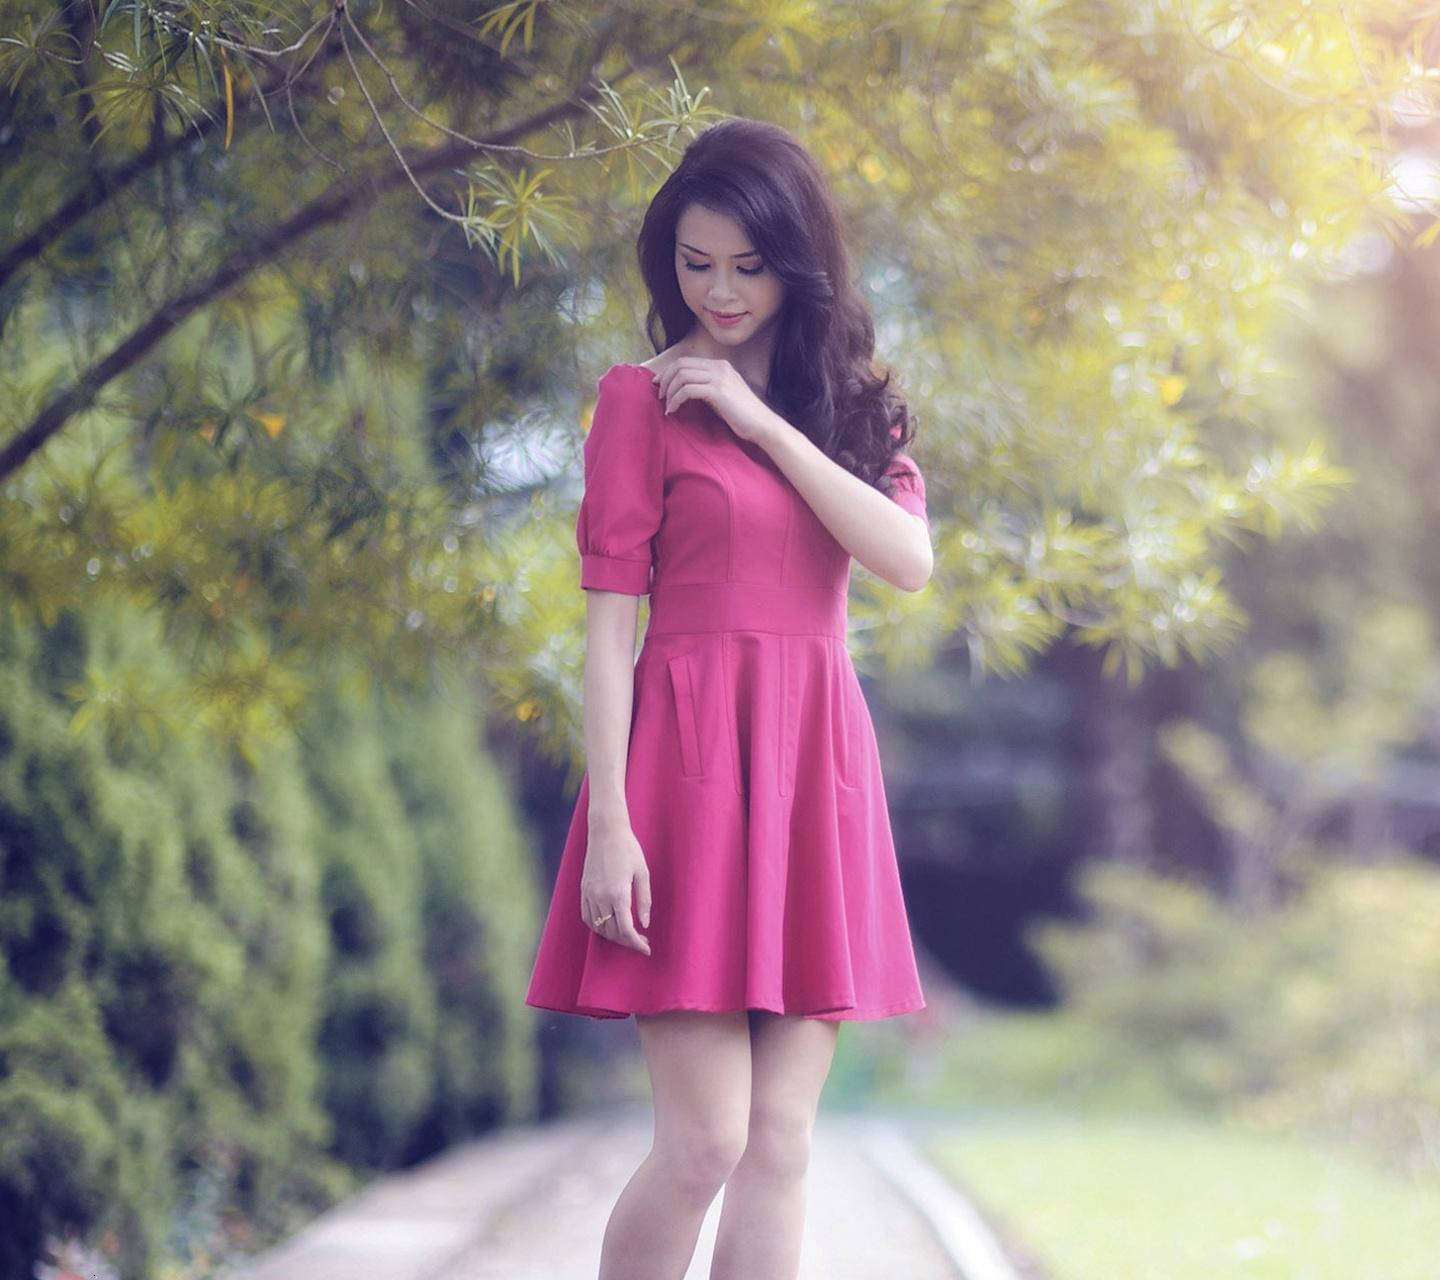 Chinese Woman In Red Dress Wallpaper